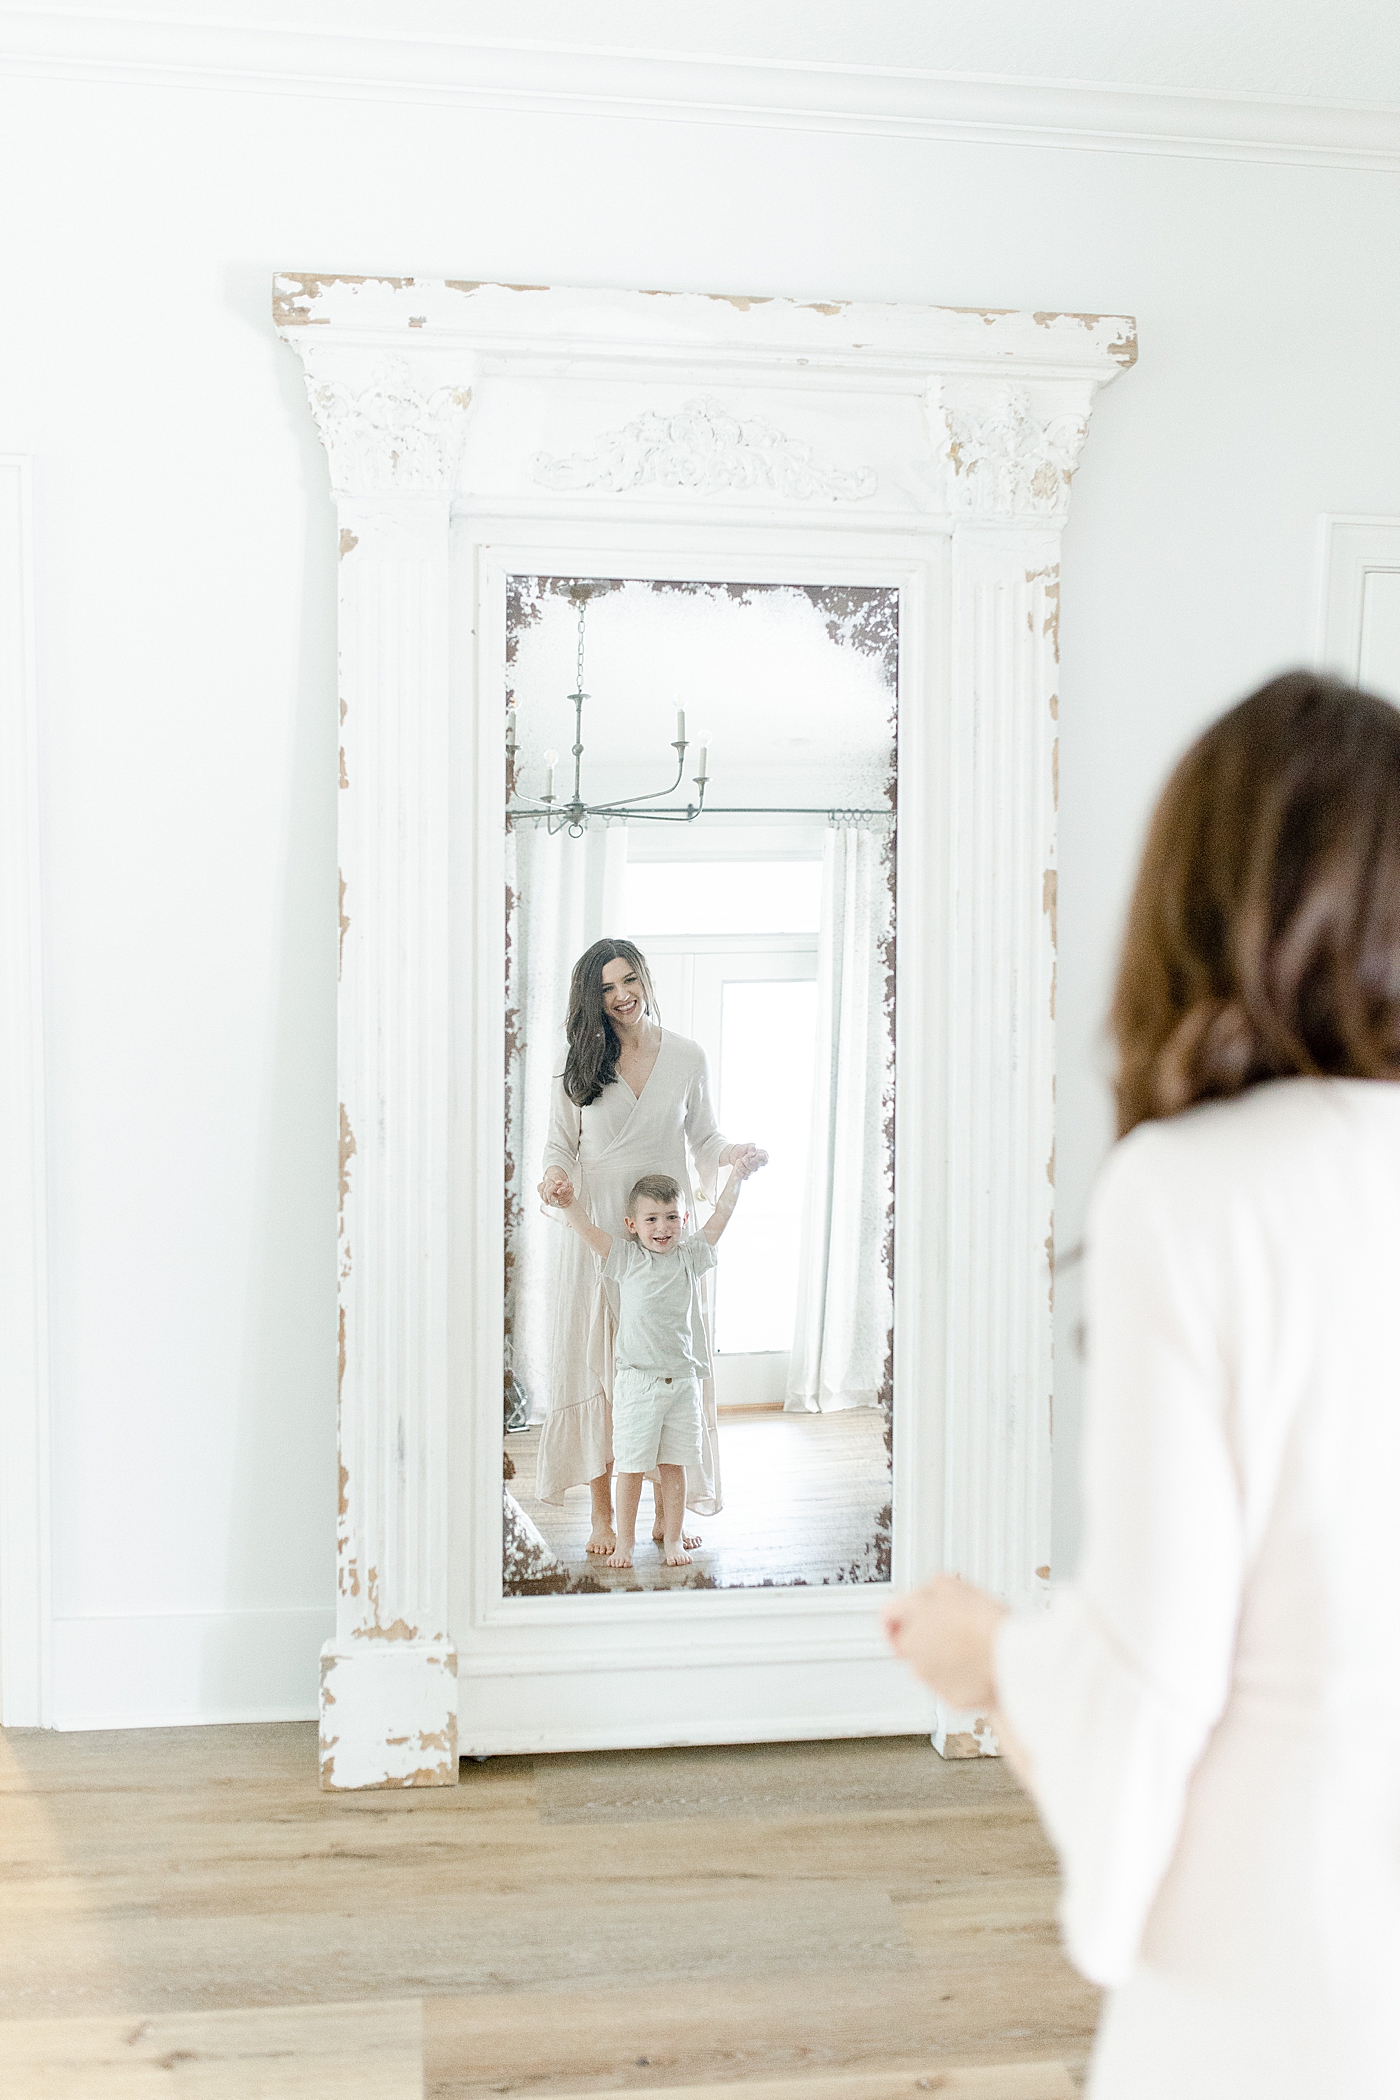 Mom looking into mirror with her son. Photo by Little Sunshine Photography